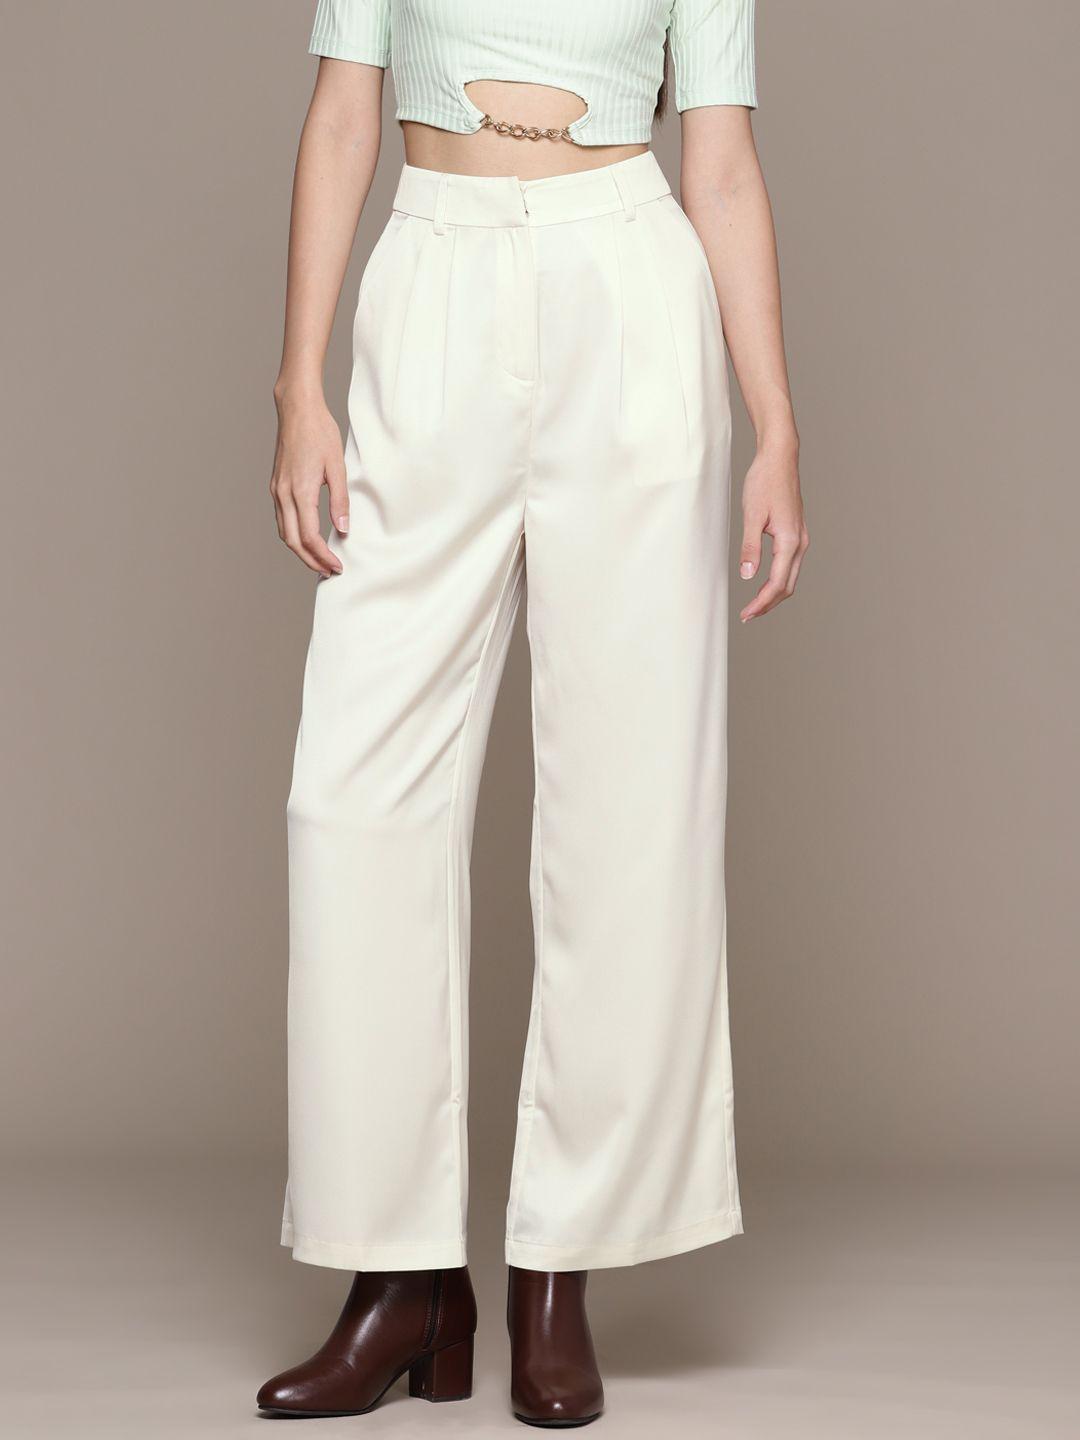 ritu-kumar-relaxed-loose-fit-pleated-trousers